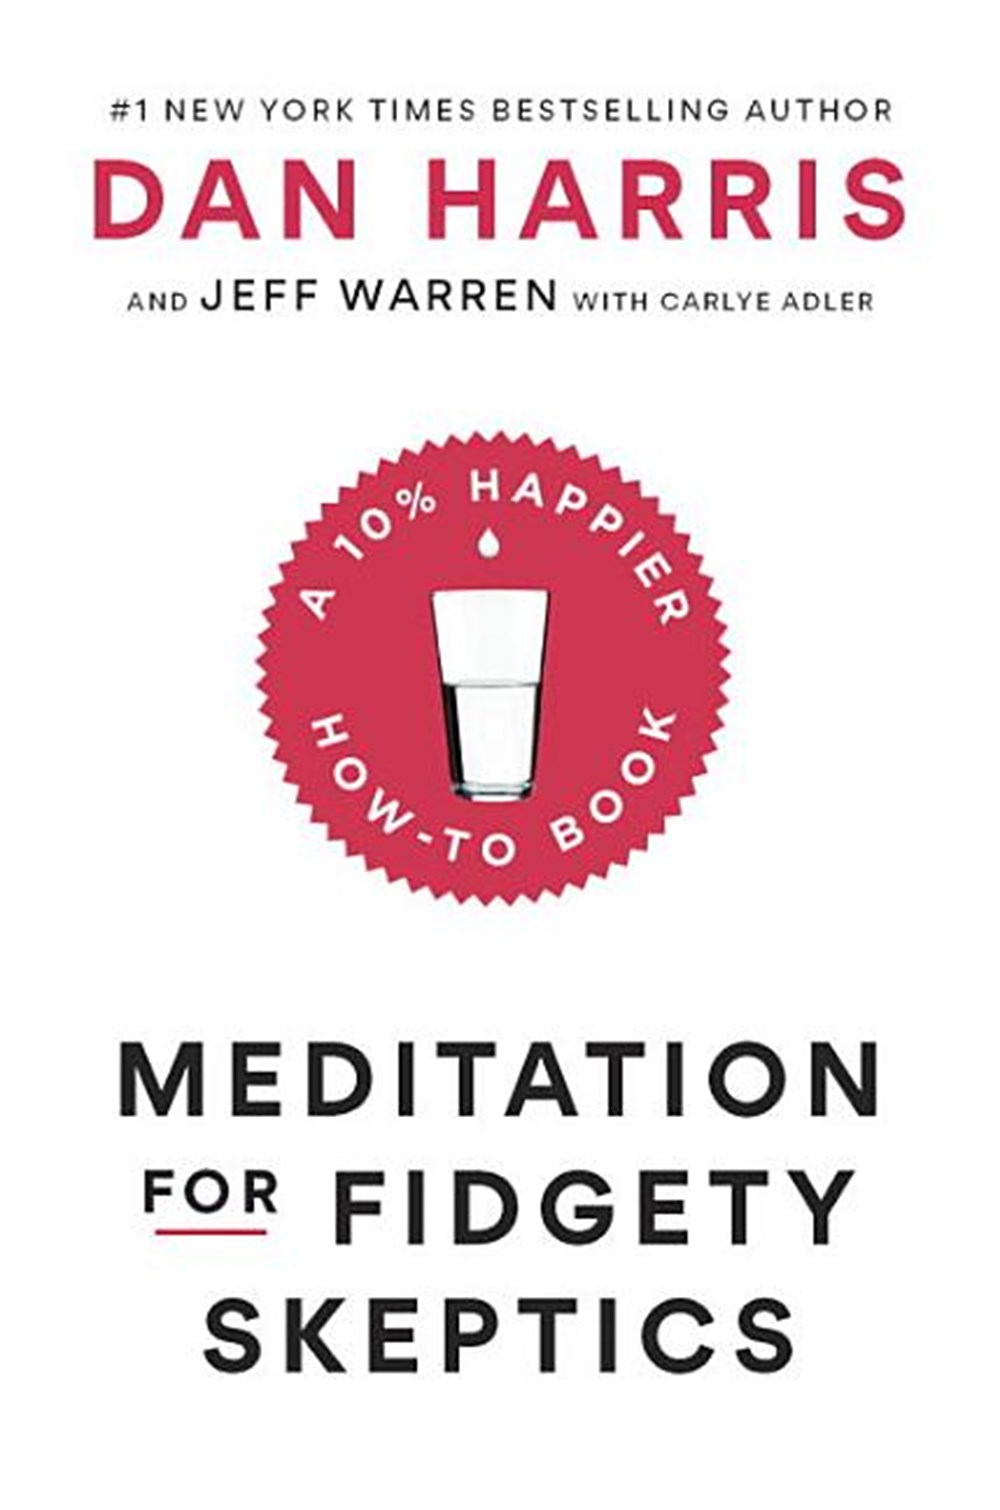 Meditation for Fidgety Skeptics A 10% Happier How-To Book